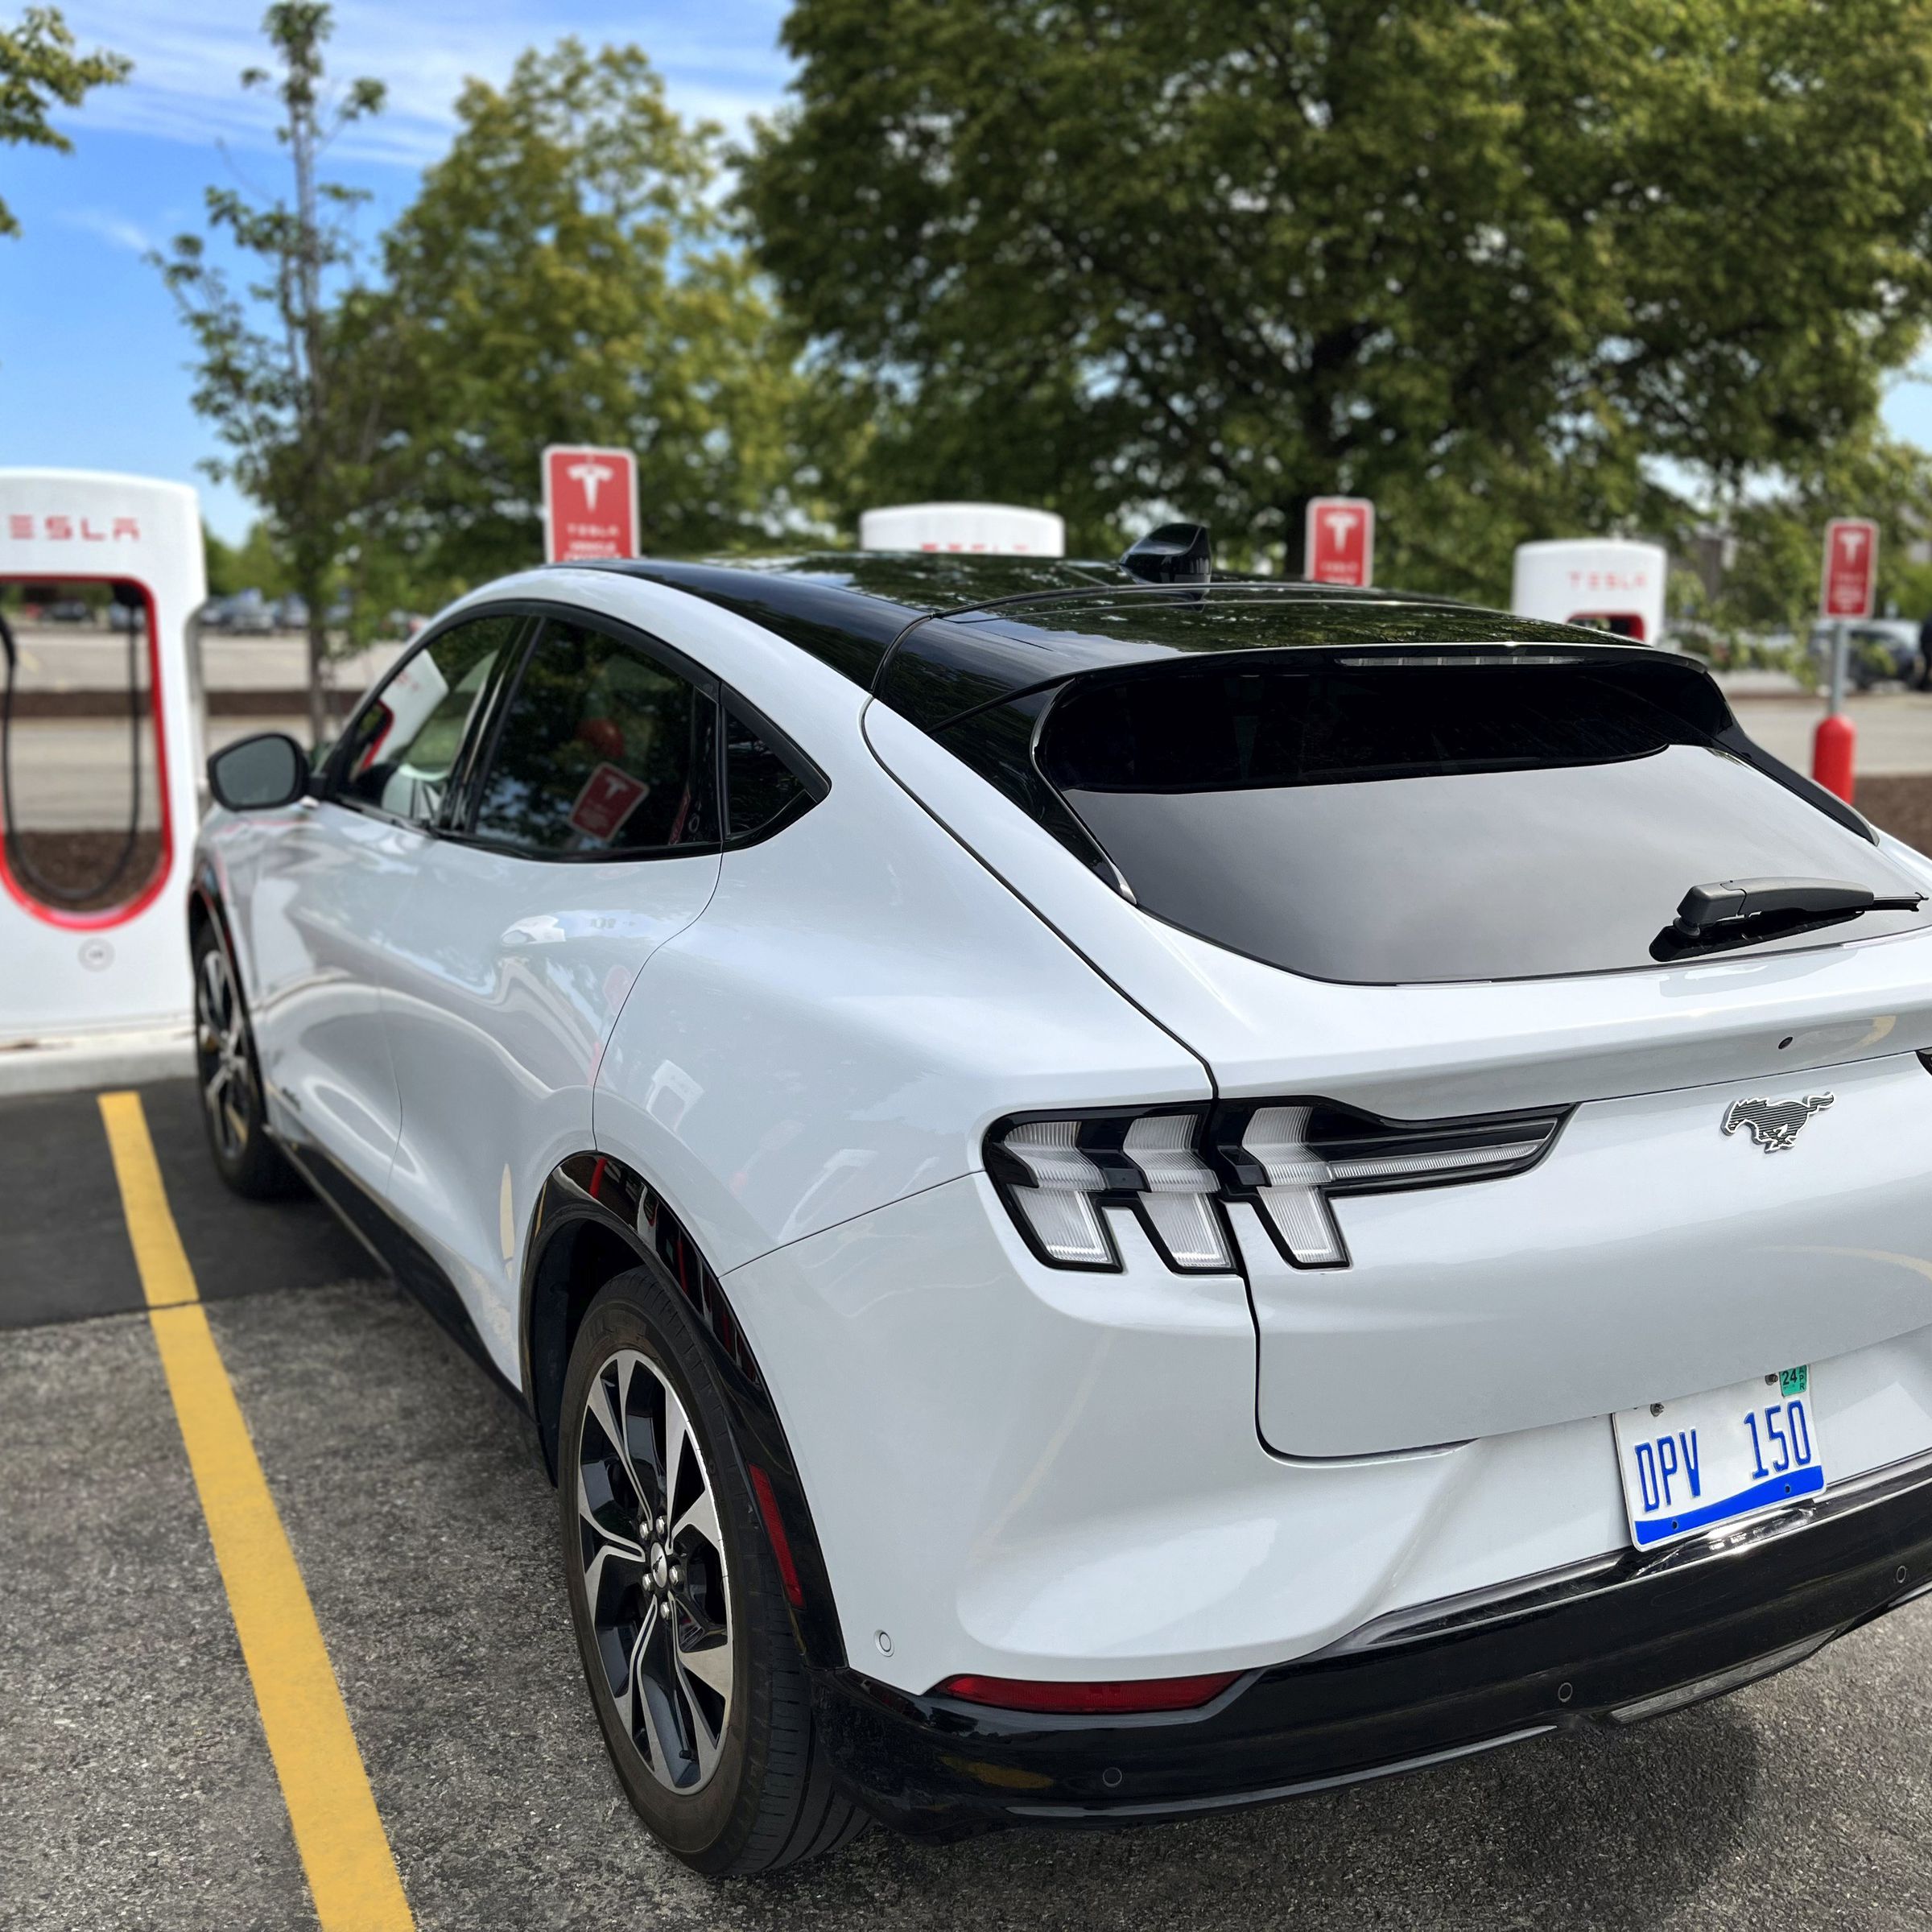 A Ford Mustang Mach-E sitting at a Tesla Supercharger